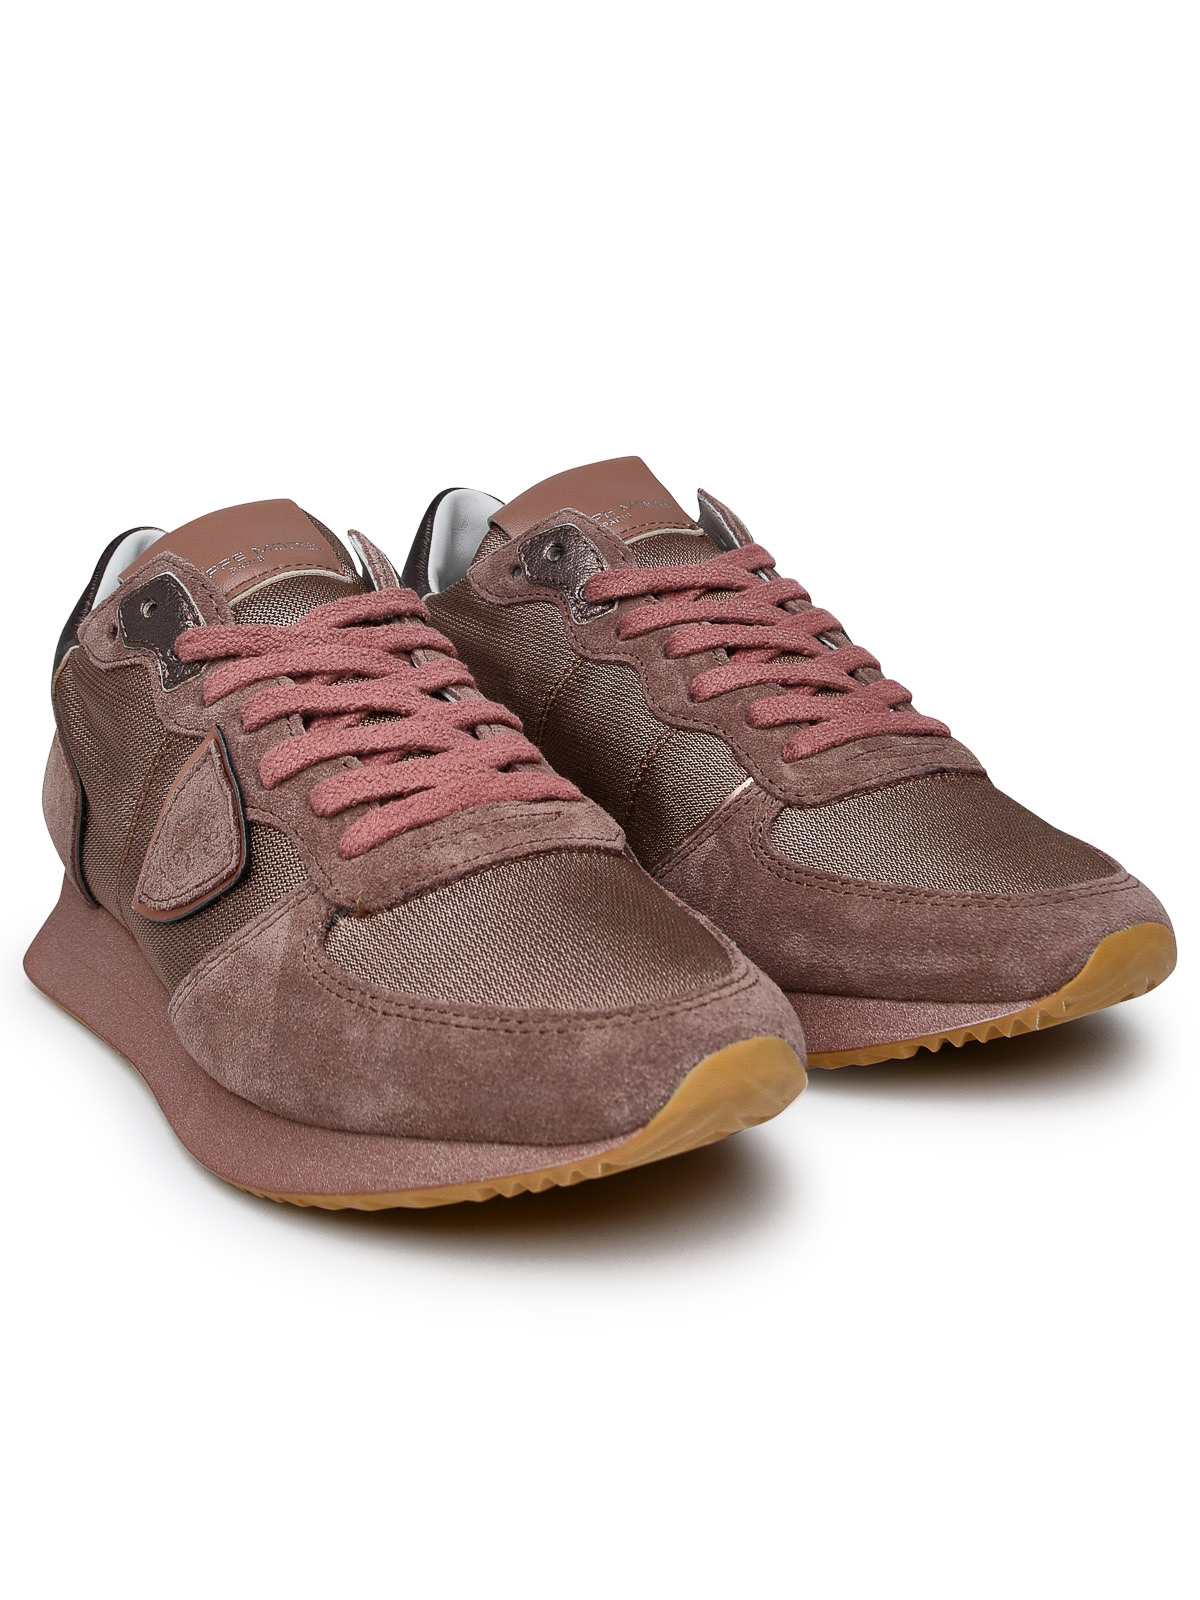 Trainers Philippe Model - Trpx sneaker in pink technical fabric